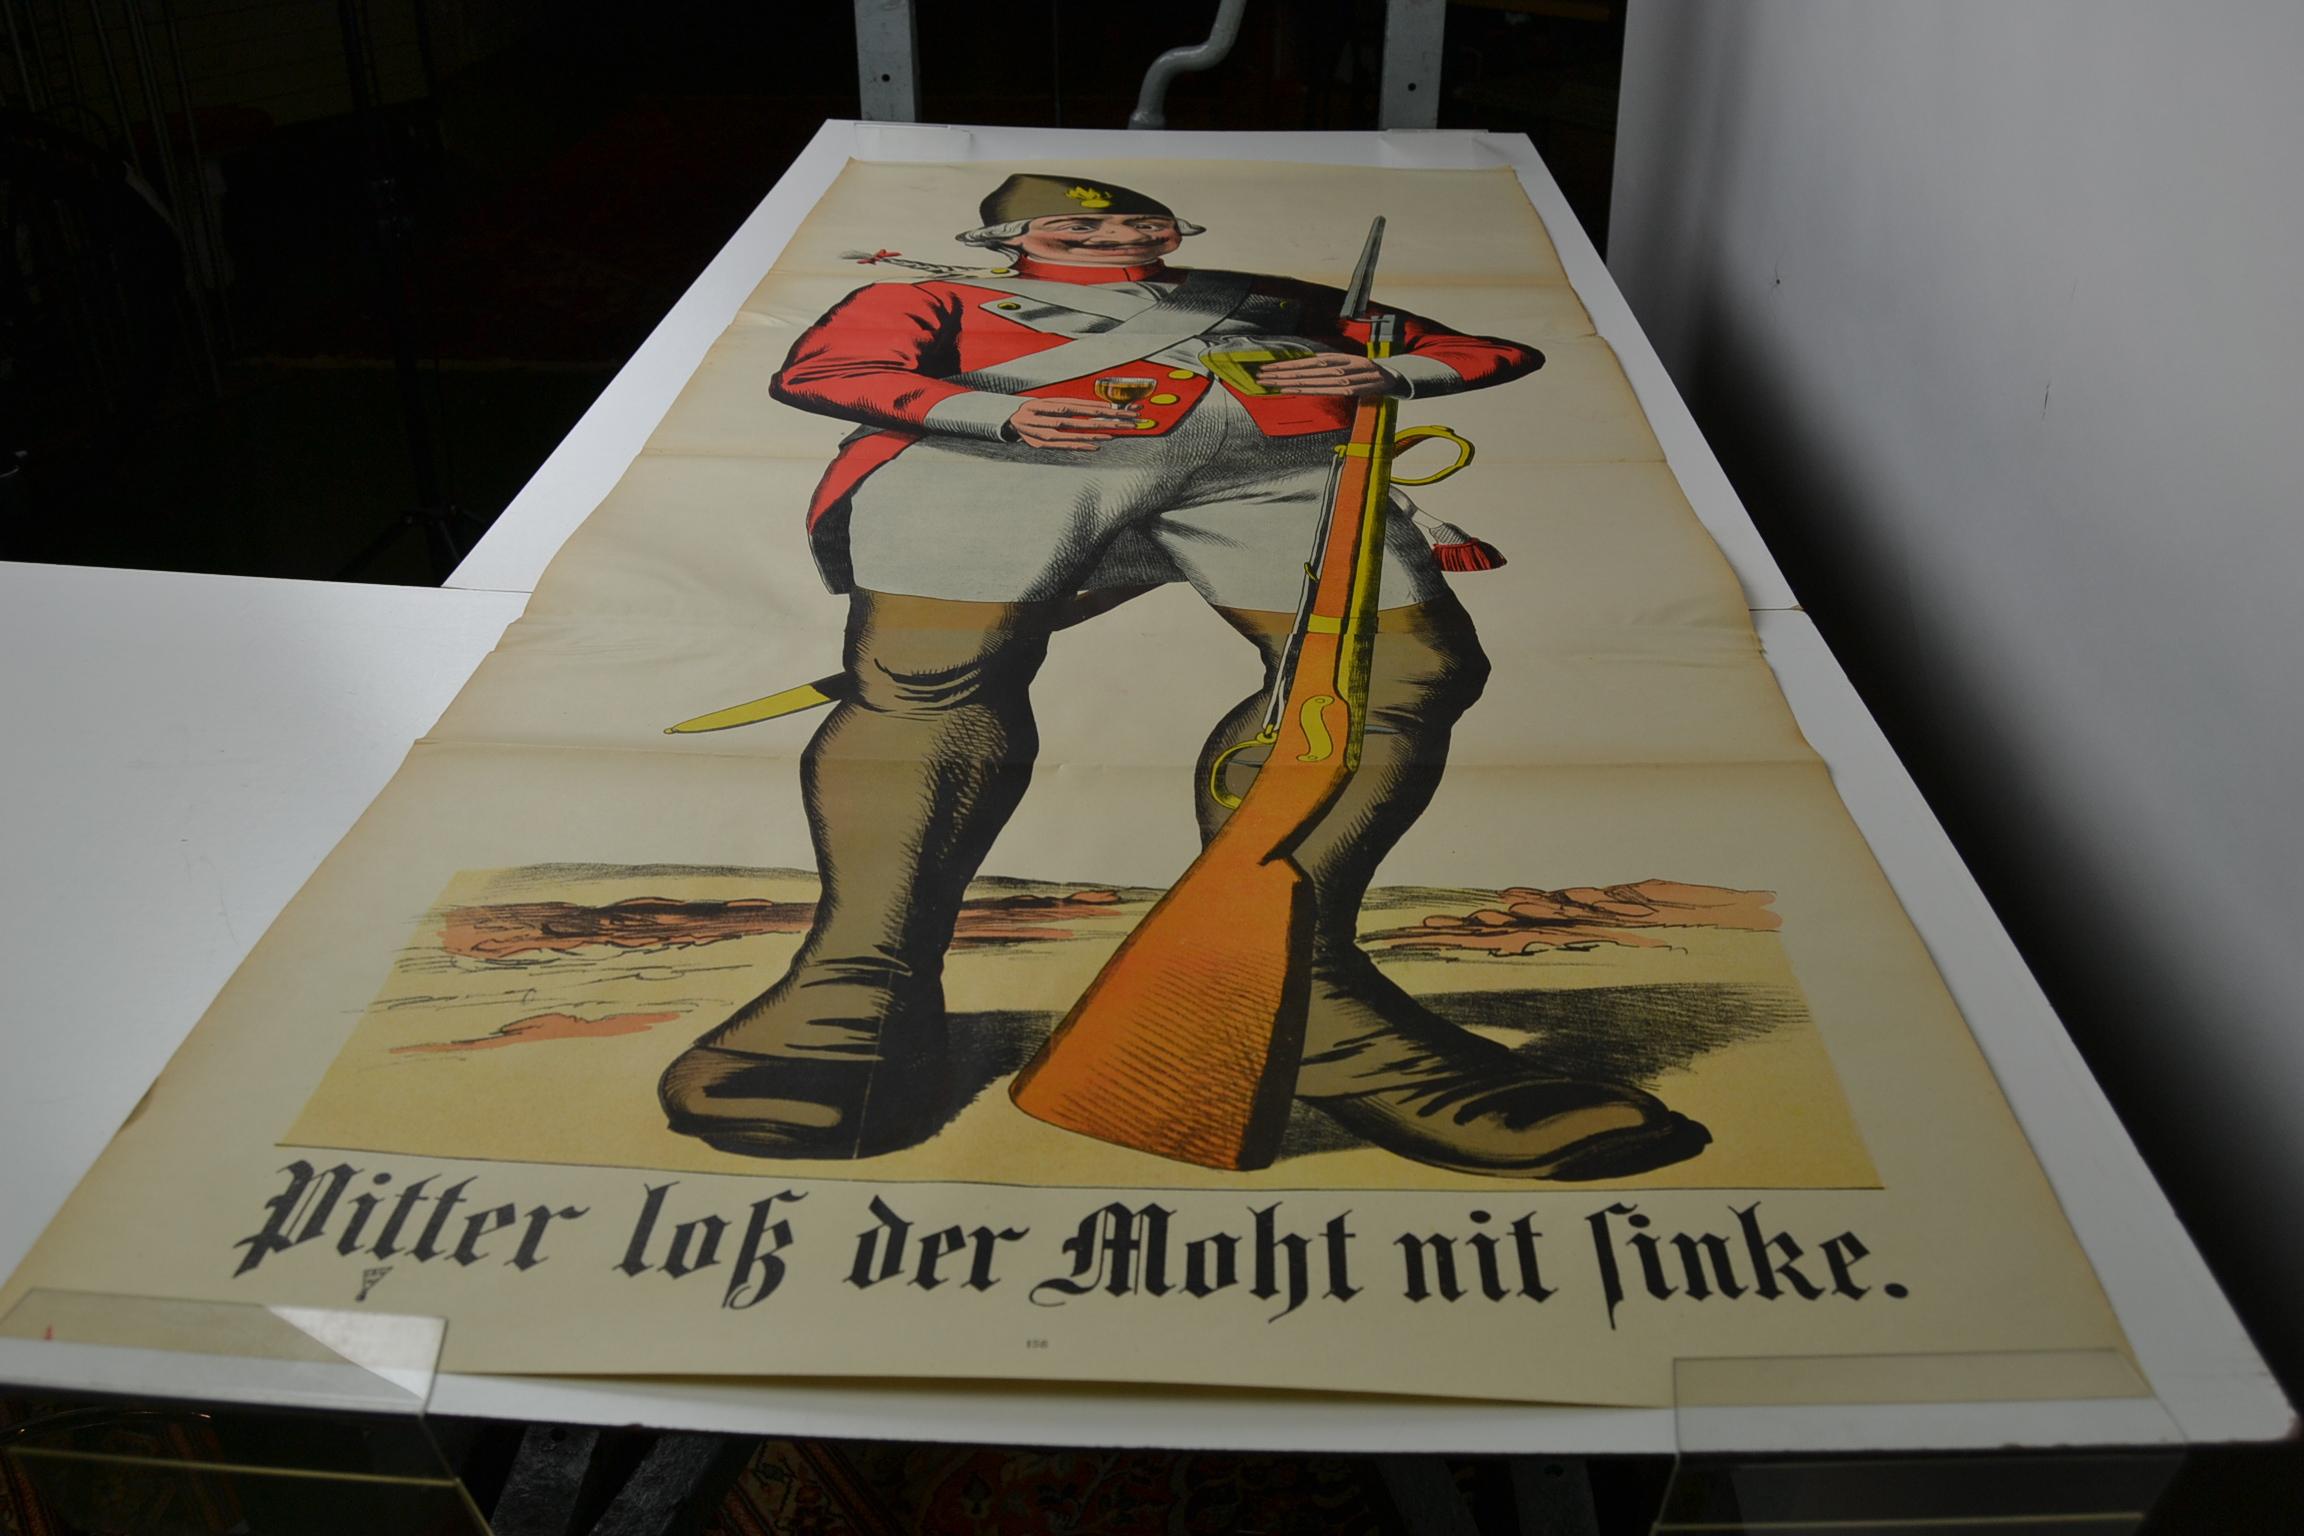 1880s European Lifesize Stone Lithography Poster with an Officer In Good Condition For Sale In Antwerp, BE